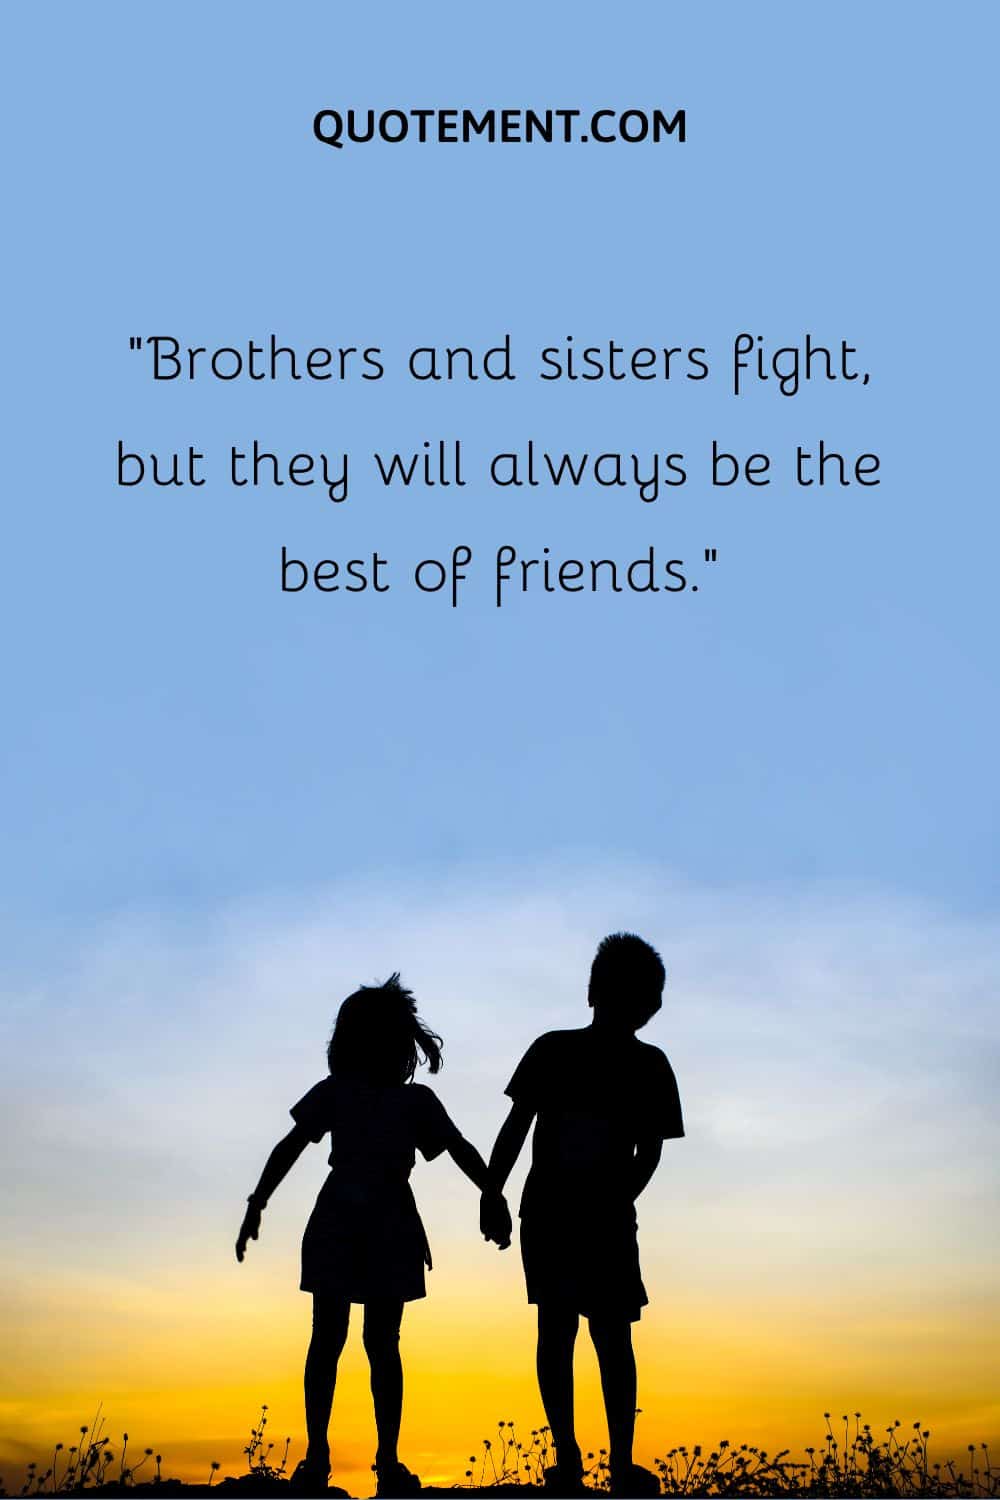 “Brothers and sisters fight, but they will always be the best of friends.”